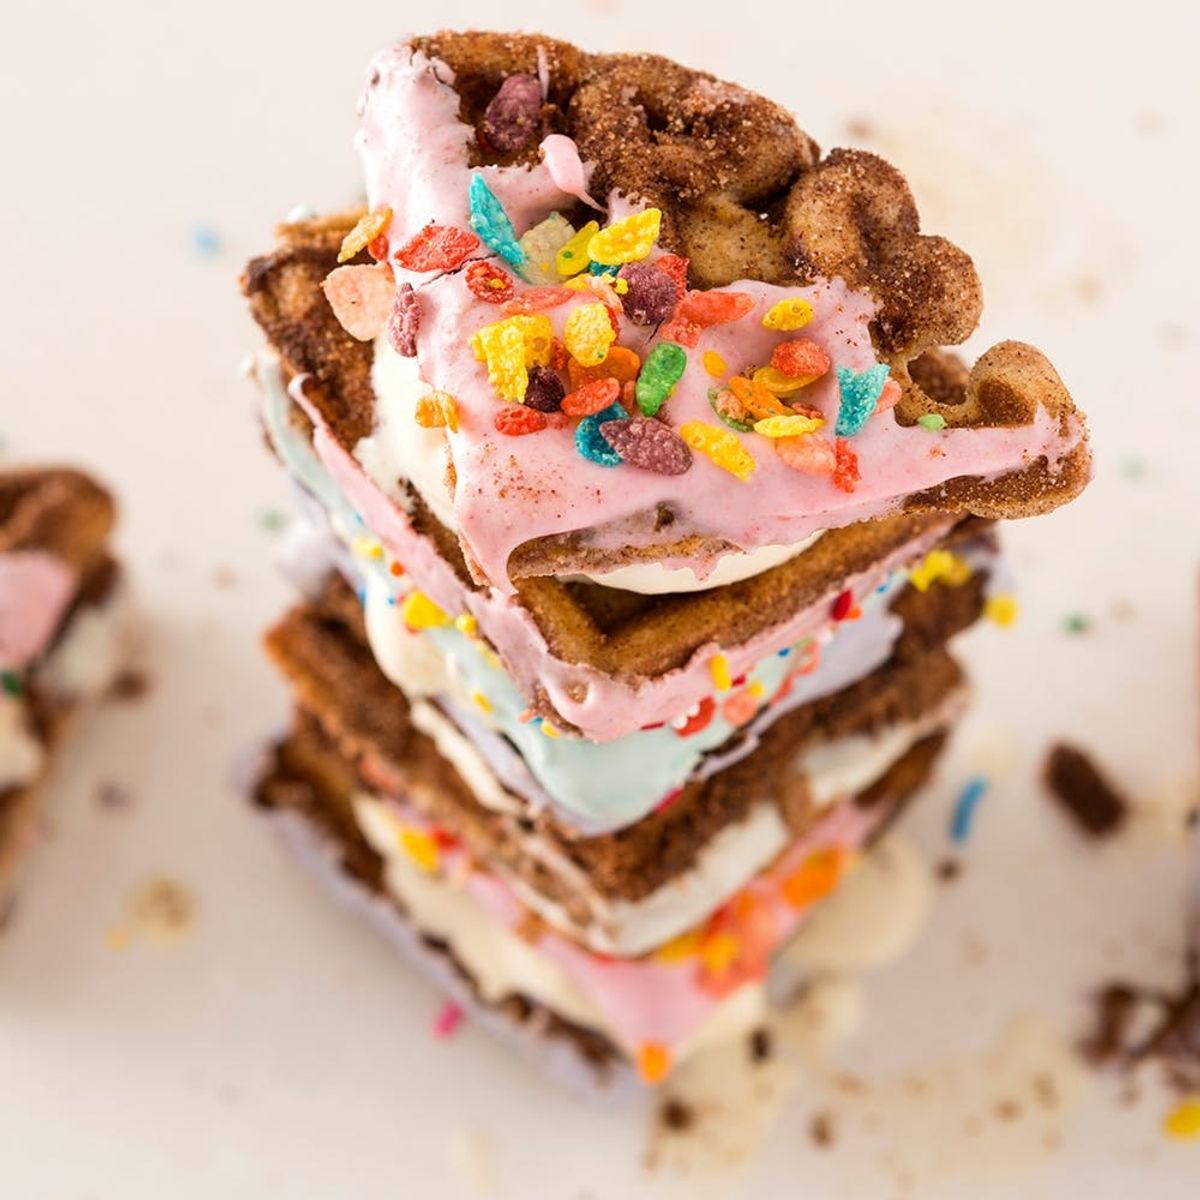 Live Your Fullest Life With This Churro Waffle Ice Cream Sandwich Recipe